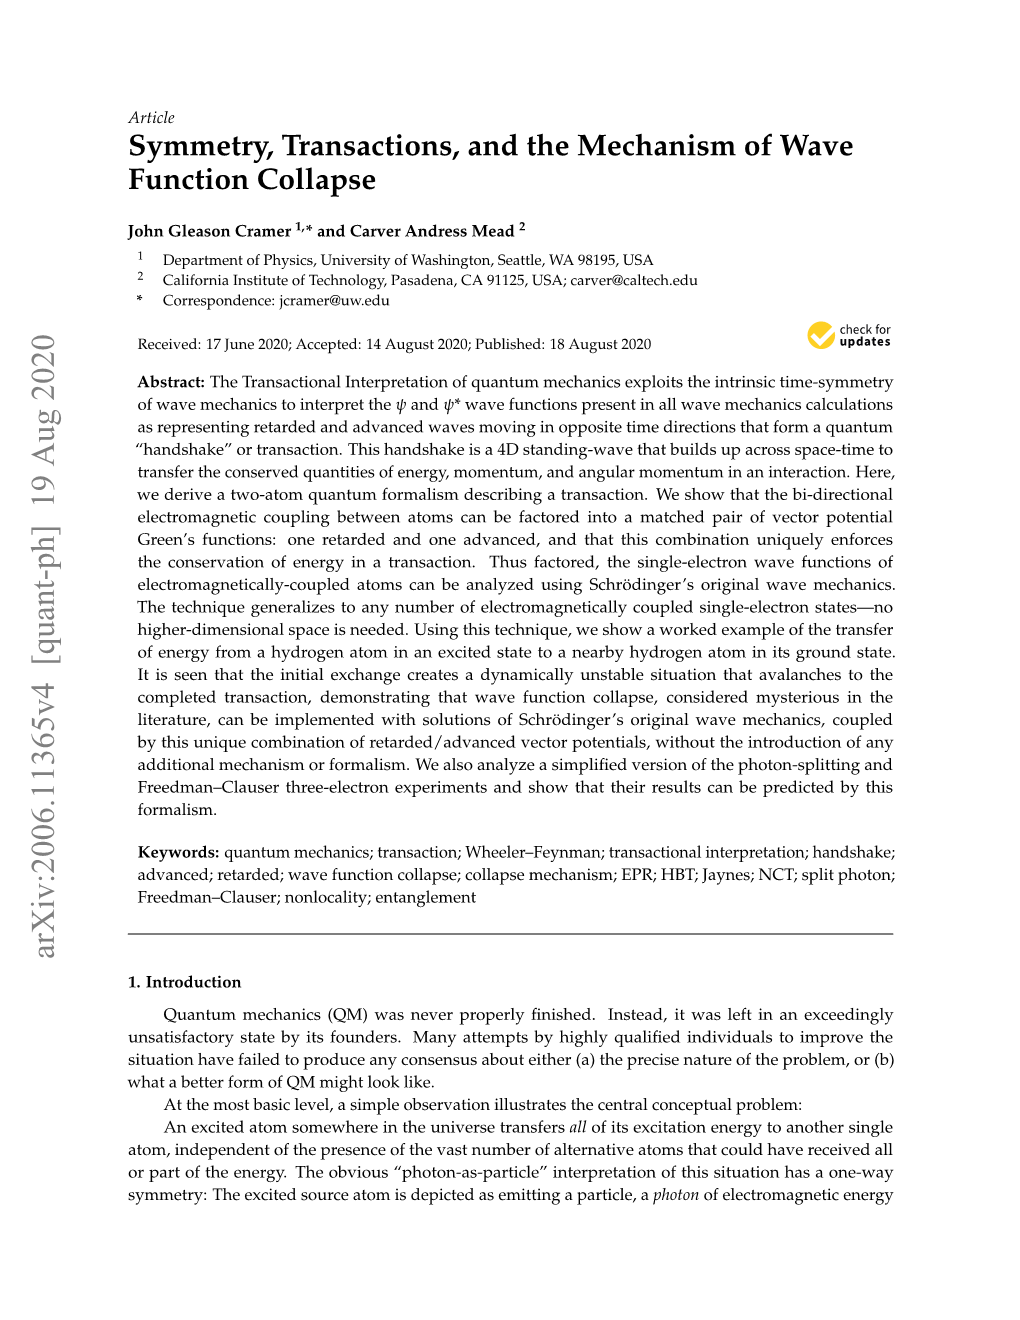 Symmetry, Transactions, and the Mechanism of Wave Function Collapse